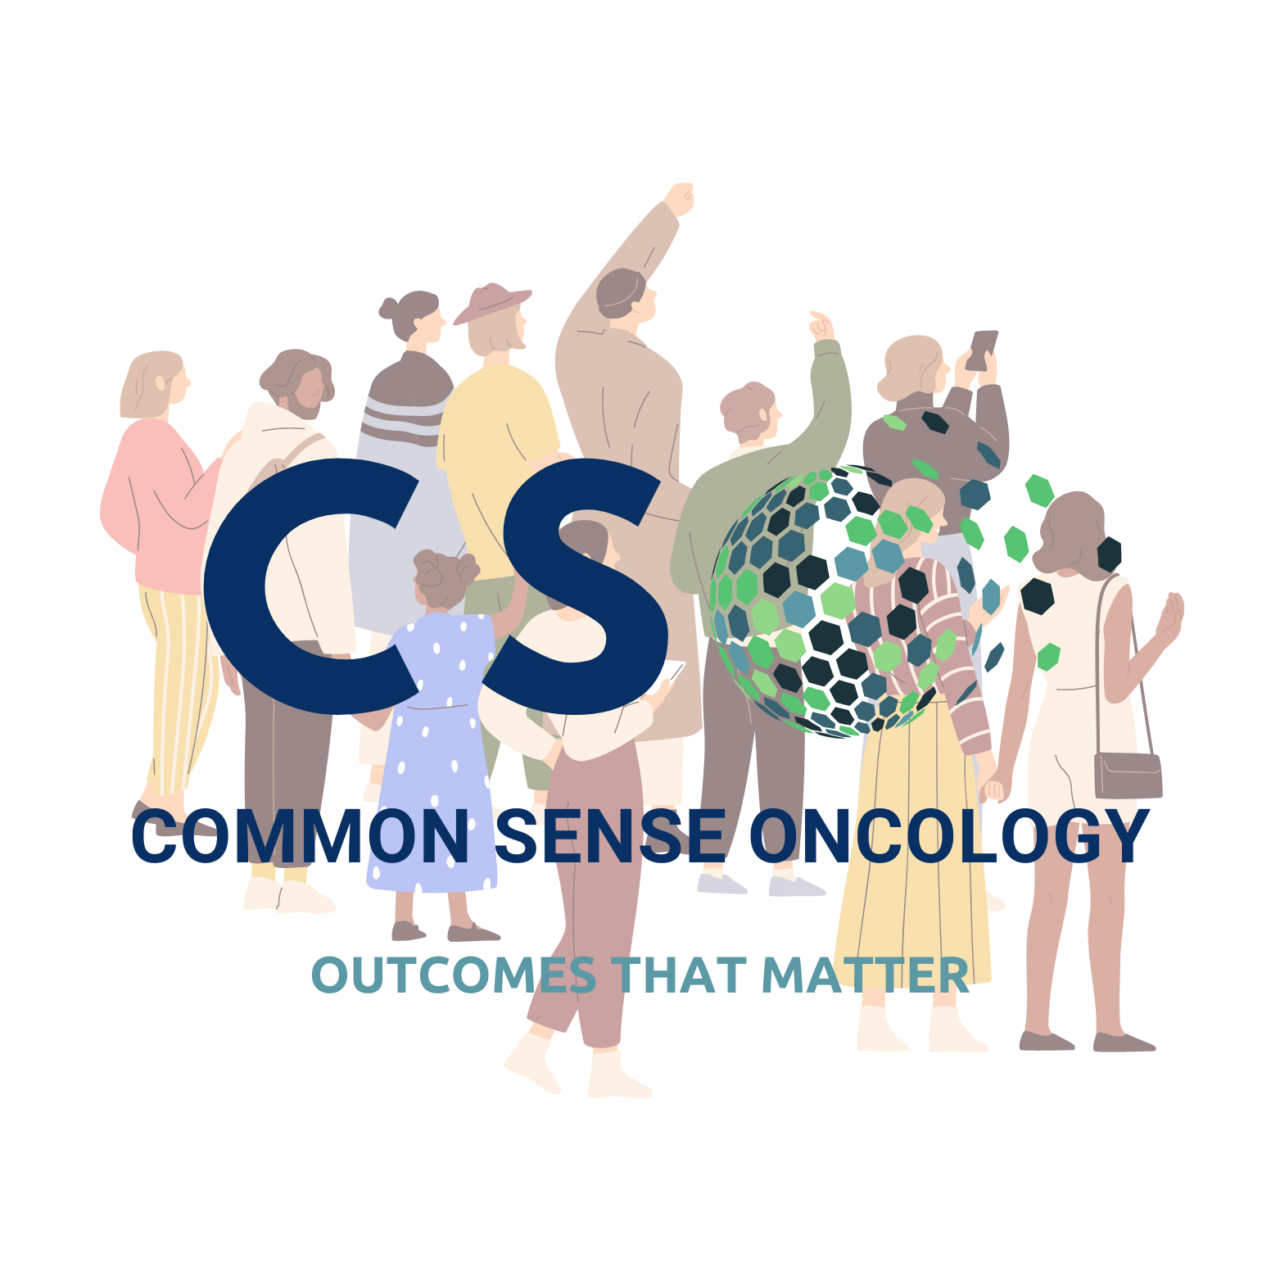 CBC News’ The National covered about our common sense oncology movement – Common Sense Oncology